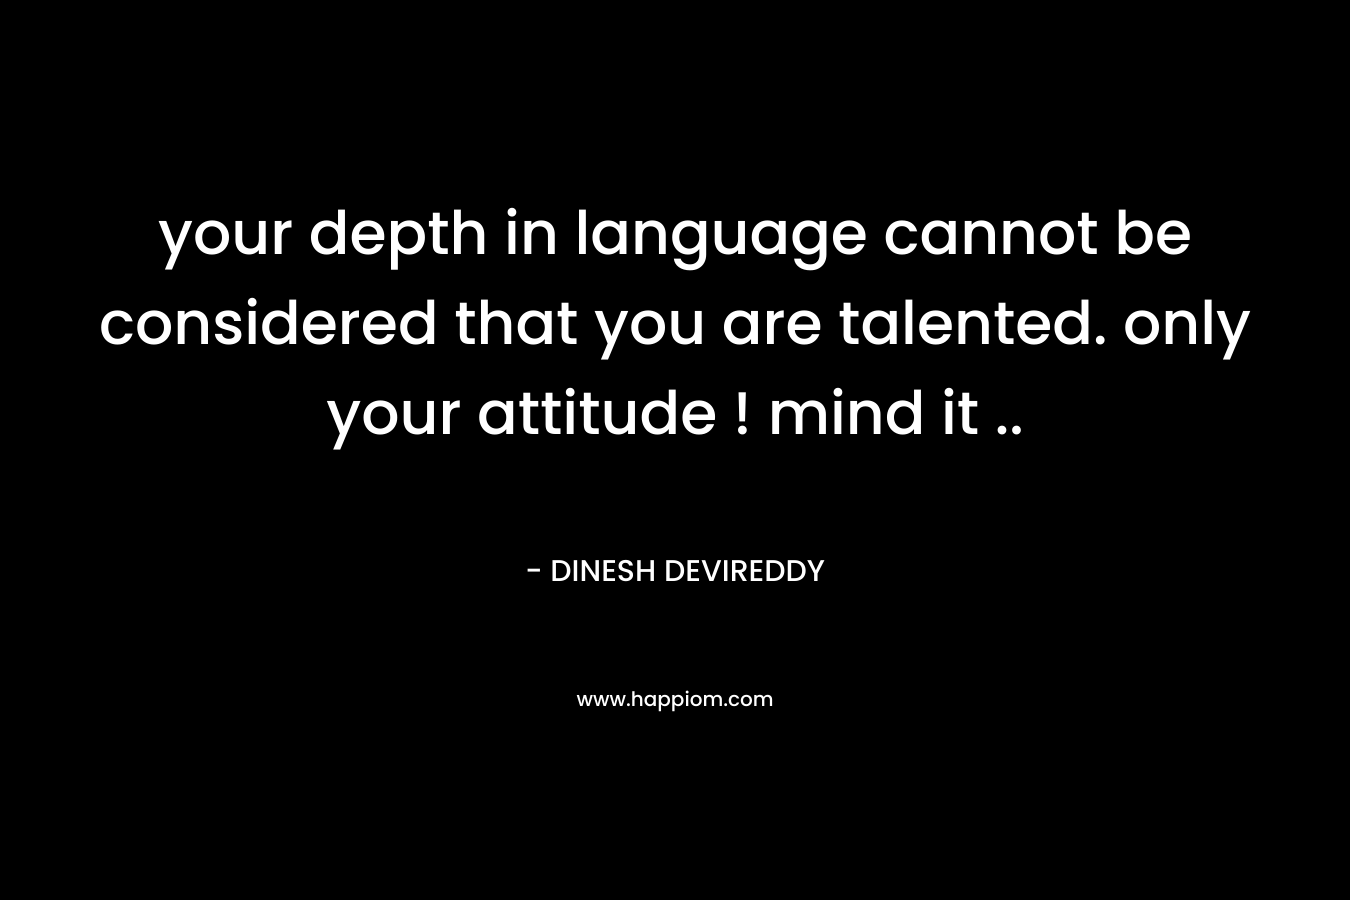 your depth in language cannot be considered that you are talented. only your attitude ! mind it ..